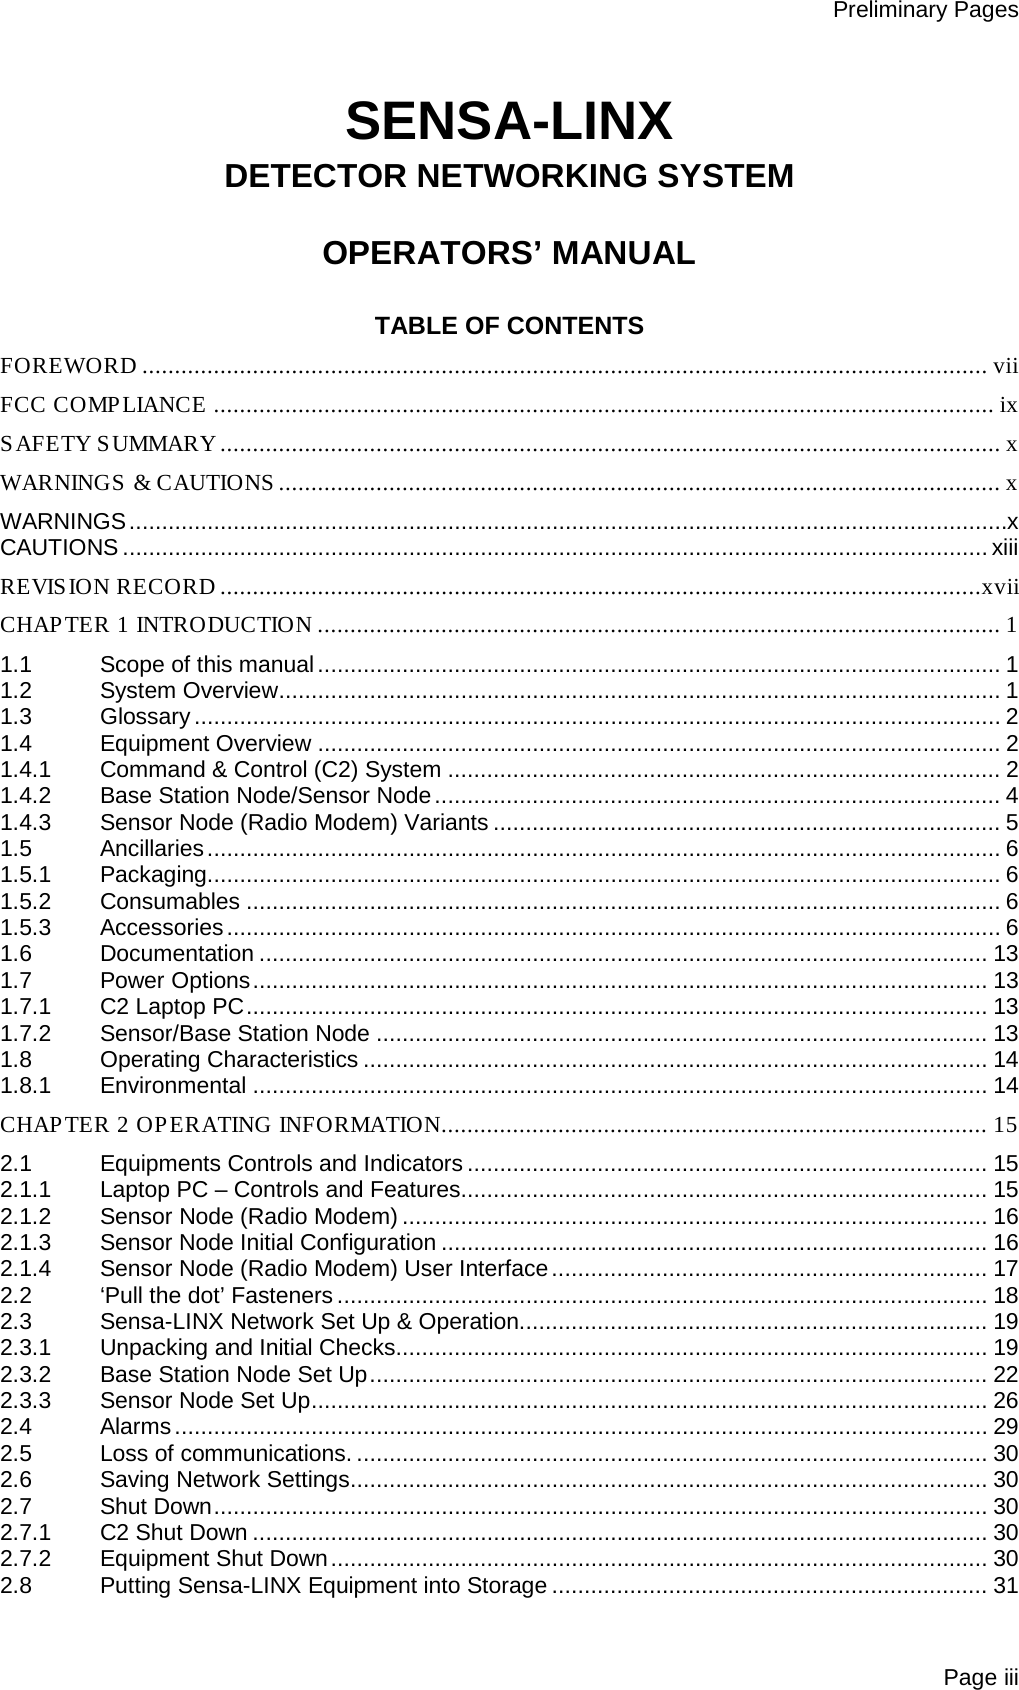 Preliminary Pages Page iii  SENSA-LINX DETECTOR NETWORKING SYSTEM  OPERATORS’ MANUAL  TABLE OF CONTENTS FOREWORD .................................................................................................................................. vii FCC COMPLIANCE ........................................................................................................................ ix SAFETY SUMMARY ........................................................................................................................ x WARNINGS &amp; CAUTIONS ............................................................................................................... x WARNINGS ....................................................................................................................................... x CAUTIONS ..................................................................................................................................... xiii REVISION RECORD .....................................................................................................................xvii CHAPTER 1 INTRODUCTION ......................................................................................................... 1 1.1 Scope of this manual ......................................................................................................... 1 1.2 System Overview ............................................................................................................... 1 1.3 Glossary ............................................................................................................................ 2 1.4 Equipment Overview ......................................................................................................... 2 1.4.1 Command &amp; Control (C2) System ..................................................................................... 2 1.4.2 Base Station Node/Sensor Node ....................................................................................... 4 1.4.3 Sensor Node (Radio Modem) Variants .............................................................................. 5 1.5 Ancillaries .......................................................................................................................... 6 1.5.1 Packaging.......................................................................................................................... 6 1.5.2 Consumables .................................................................................................................... 6 1.5.3 Accessories ....................................................................................................................... 6 1.6 Documentation ................................................................................................................ 13 1.7 Power Options ................................................................................................................. 13 1.7.1 C2 Laptop PC .................................................................................................................. 13 1.7.2 Sensor/Base Station Node .............................................................................................. 13 1.8 Operating Characteristics ................................................................................................ 14 1.8.1 Environmental ................................................................................................................. 14 CHAPTER 2 OPERATING INFORMATION .................................................................................... 15 2.1 Equipments Controls and Indicators ................................................................................ 15 2.1.1 Laptop PC – Controls and Features................................................................................. 15 2.1.2 Sensor Node (Radio Modem) .......................................................................................... 16 2.1.3 Sensor Node Initial Configuration .................................................................................... 16 2.1.4 Sensor Node (Radio Modem) User Interface ................................................................... 17 2.2 ‘Pull the dot’ Fasteners .................................................................................................... 18 2.3 Sensa-LINX Network Set Up &amp; Operation........................................................................ 19 2.3.1 Unpacking and Initial Checks........................................................................................... 19 2.3.2 Base Station Node Set Up ............................................................................................... 22 2.3.3 Sensor Node Set Up ........................................................................................................ 26 2.4 Alarms ............................................................................................................................. 29 2.5 Loss of communications. ................................................................................................. 30 2.6 Saving Network Settings .................................................................................................. 30 2.7 Shut Down ....................................................................................................................... 30 2.7.1 C2 Shut Down ................................................................................................................. 30 2.7.2 Equipment Shut Down ..................................................................................................... 30 2.8 Putting Sensa-LINX Equipment into Storage ................................................................... 31 